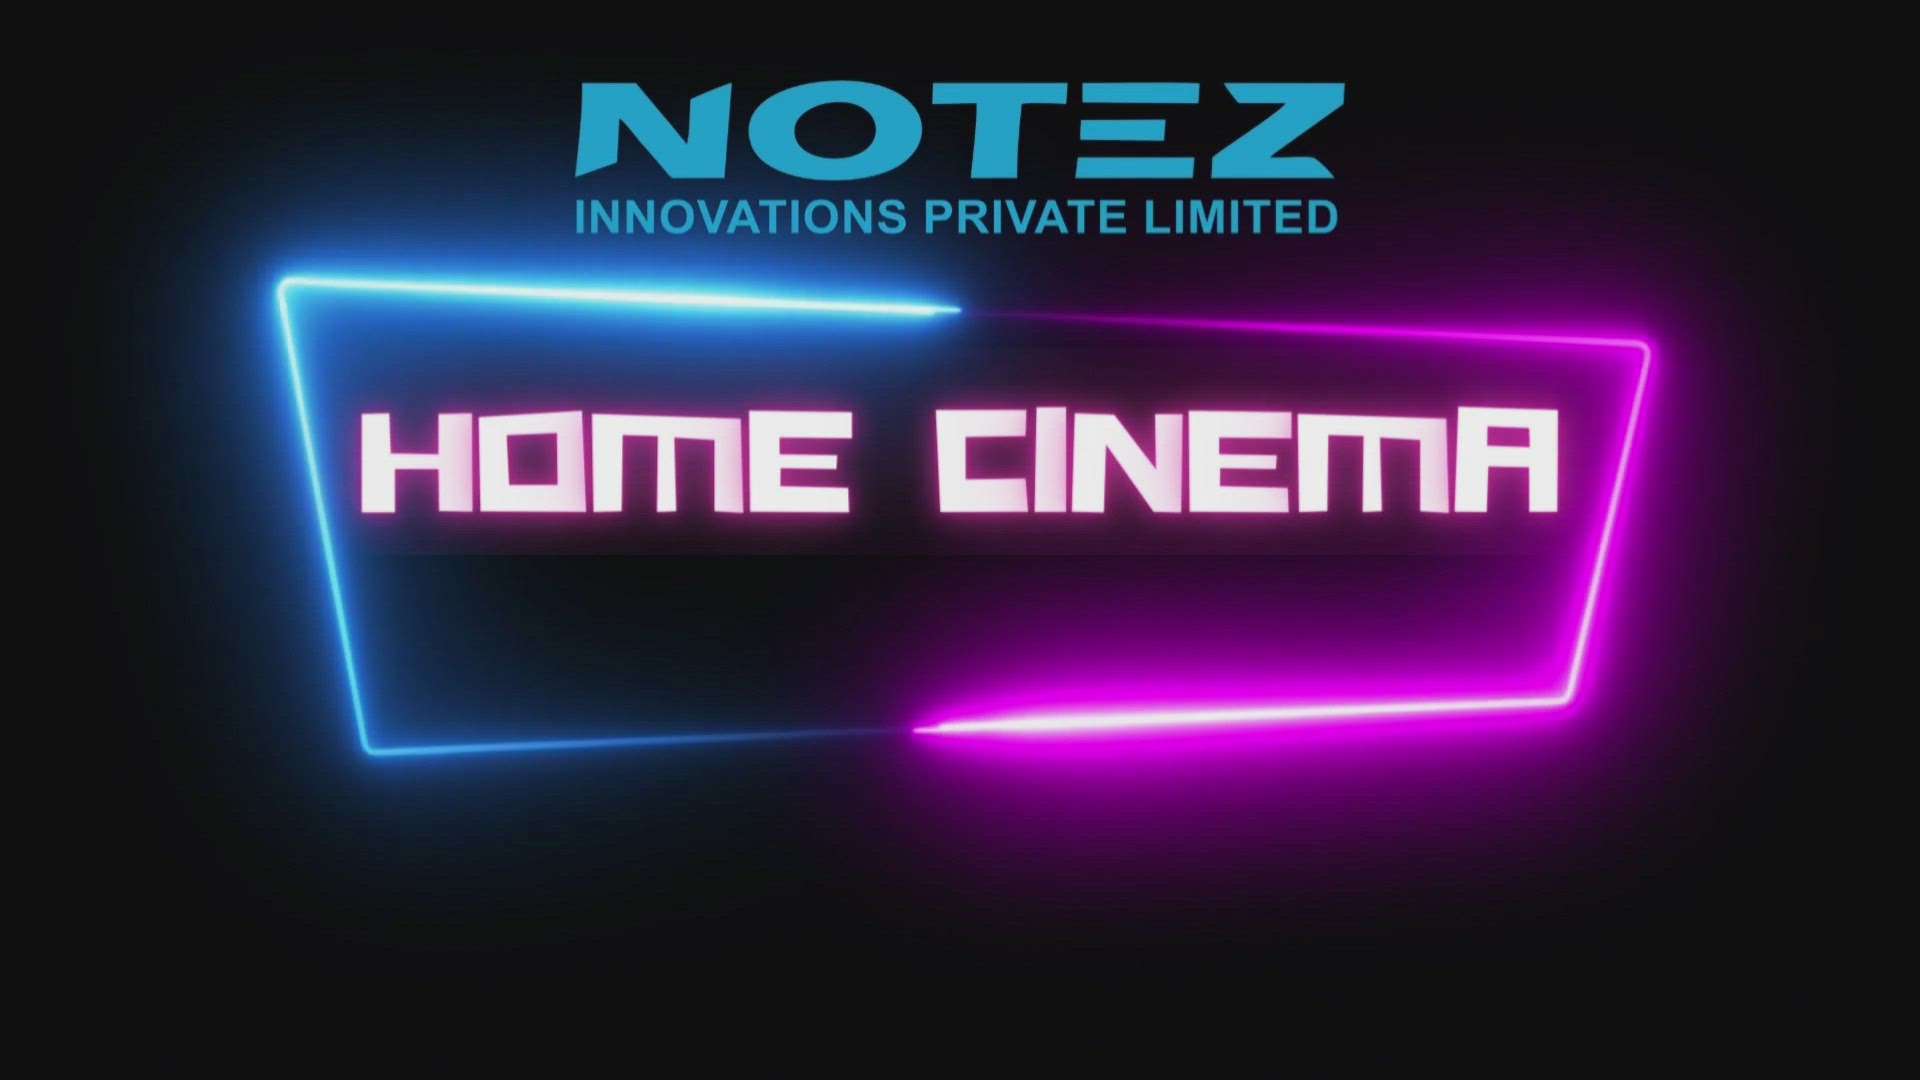 #hometheatre 
 Successfully completed Home cinema 7.2.4 ( Dolby Atmos ) @ kallara , Trivandrum.
Notez Innovations, "We build your dream home theatre with passion"
Your dream is our fuel, we will give you supreme home 
cinema experience in your budget.
For more info, contact us 
+91 98959 44366
+91 9061764435
+91 90748 19343